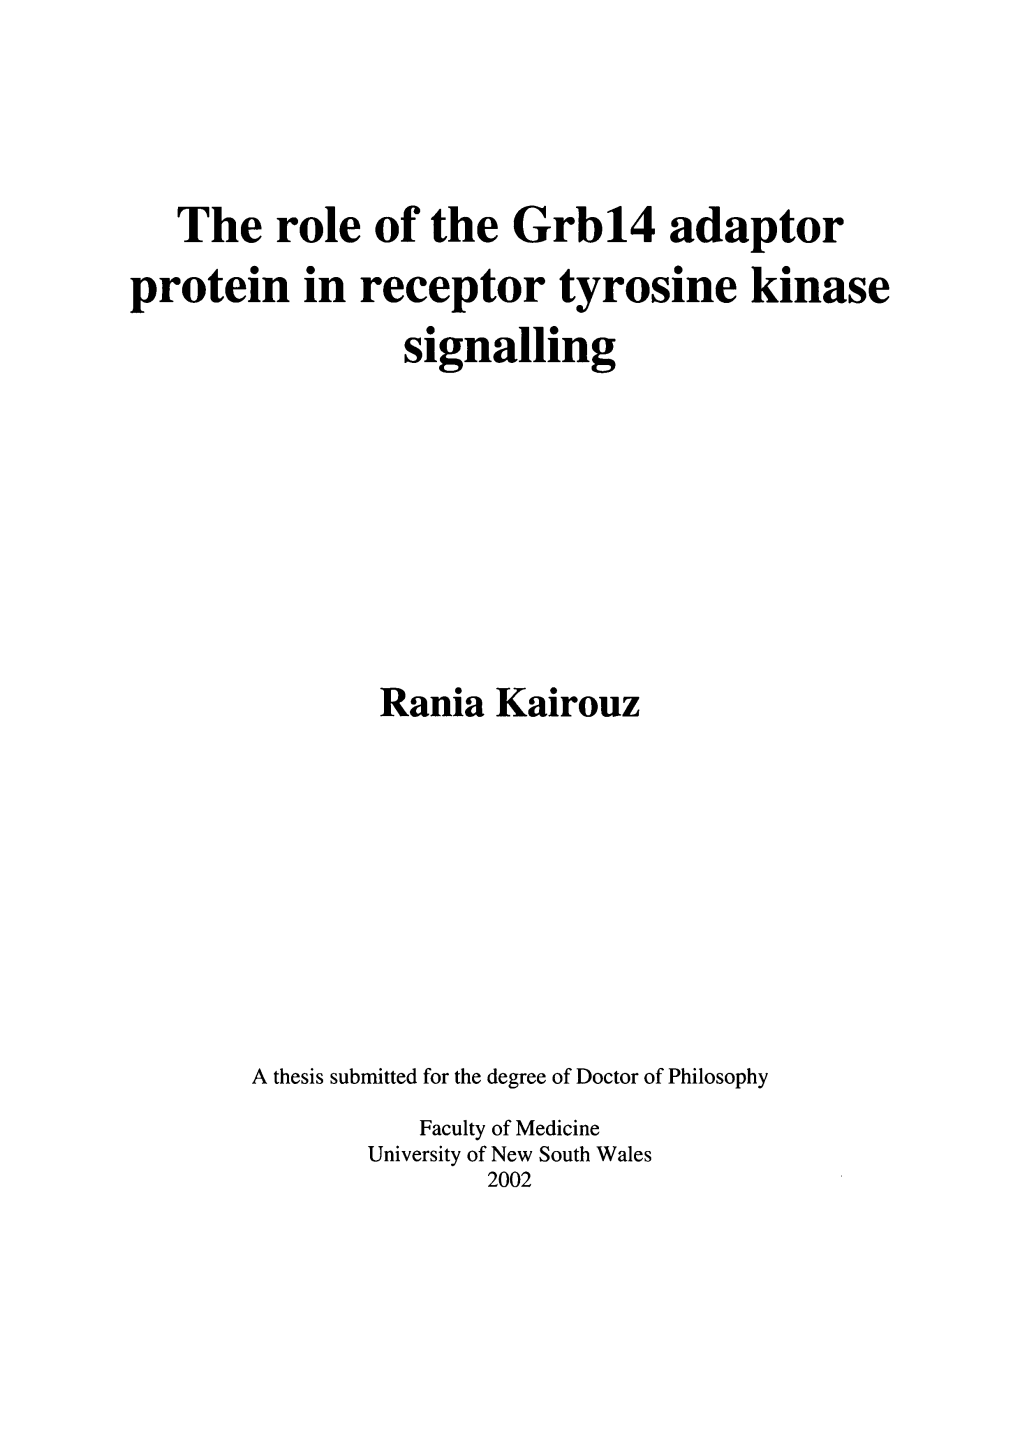 The Role of the Grb14 Adaptor Protein in Receptor Tyrosine Kinase Signalling